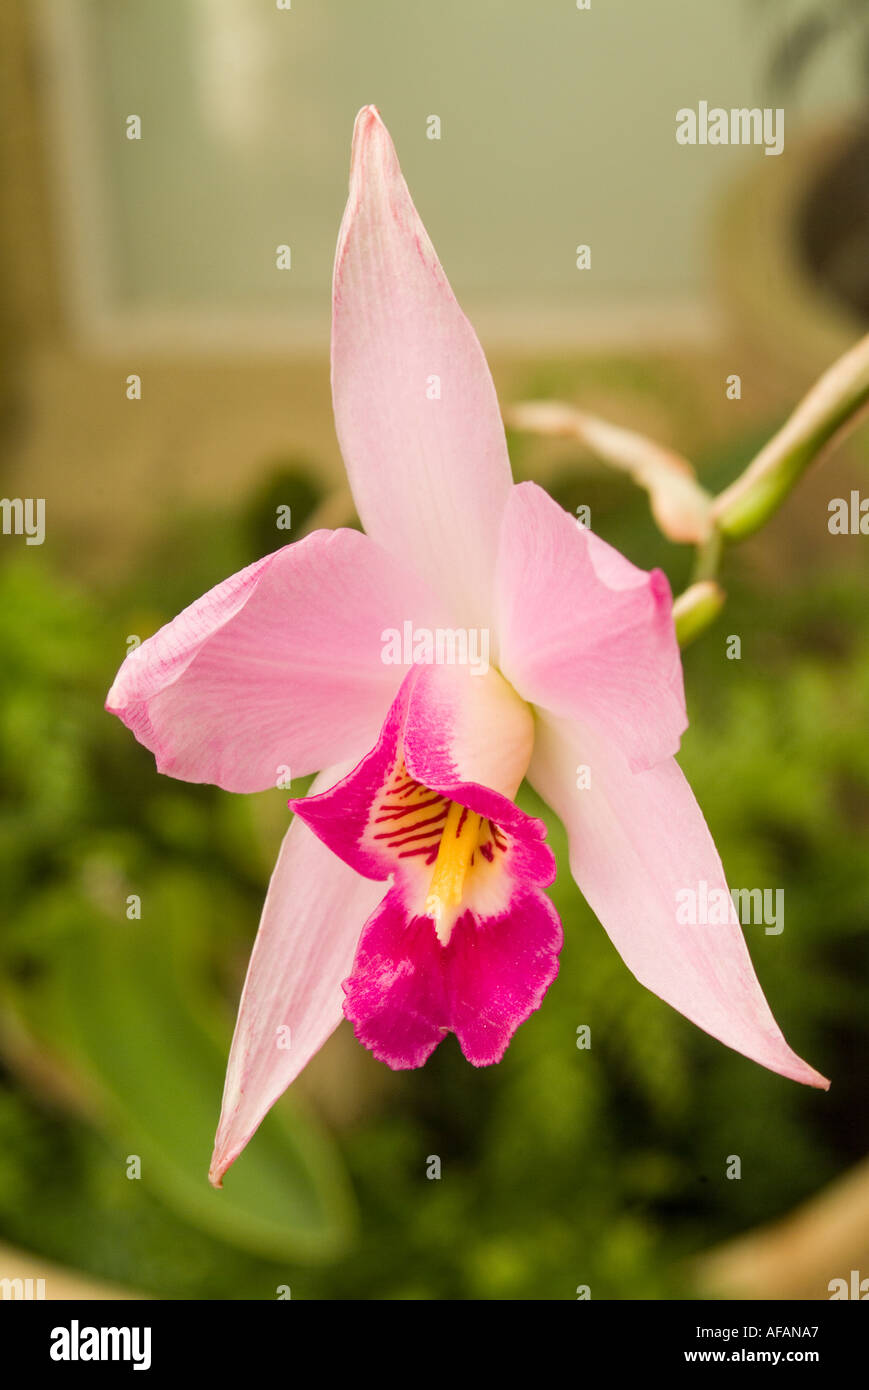 Laelia anceps an orchid from South America Stock Photo